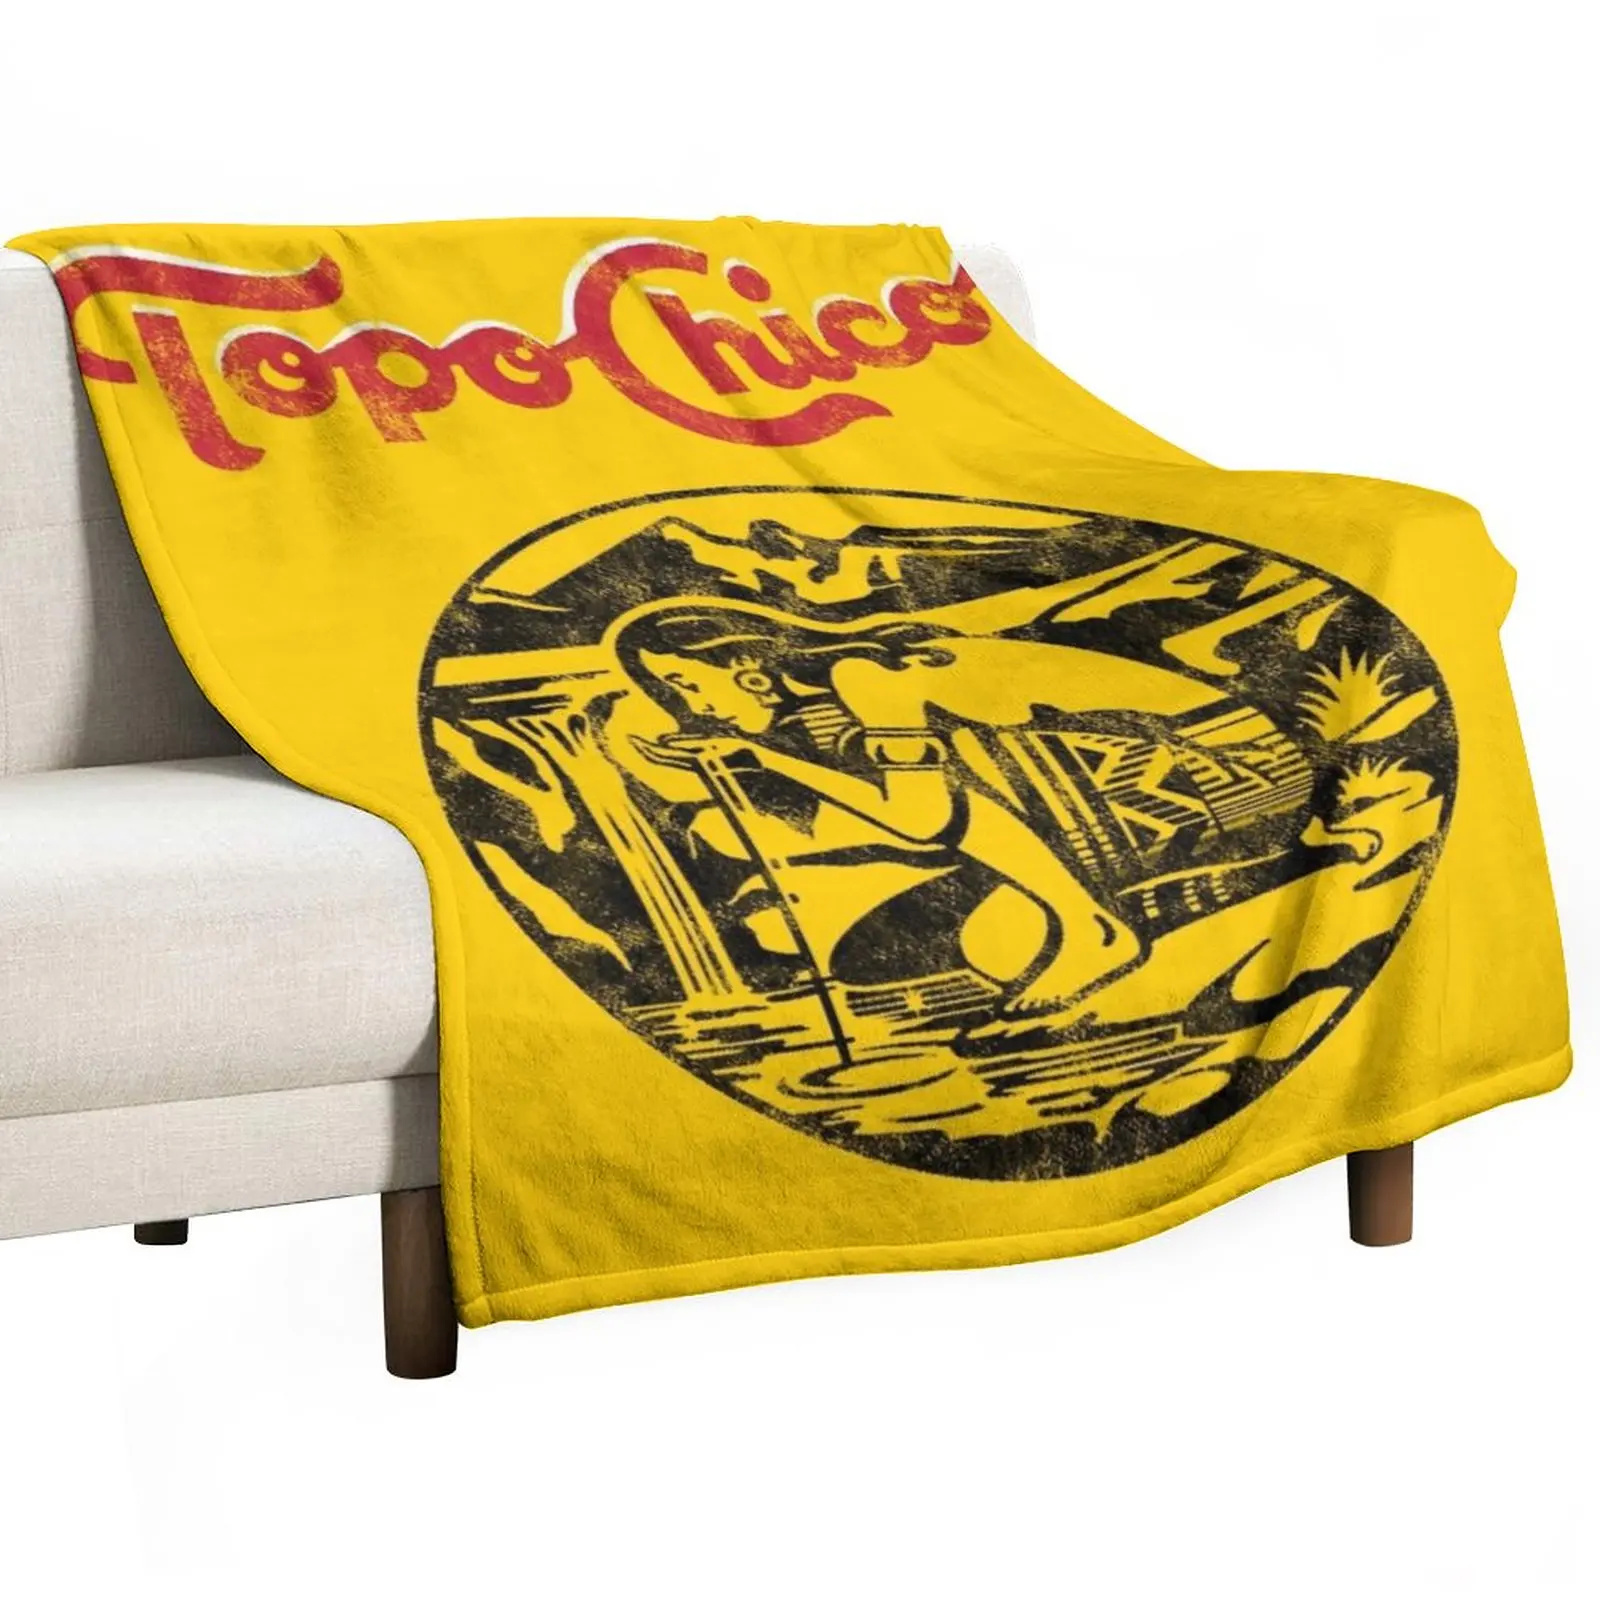 

aztec princess - Topo Chico agua mineral worn and washed logo (sparkling mineral water) Throw Blanket Sofa Quilt Blanket Fluffy